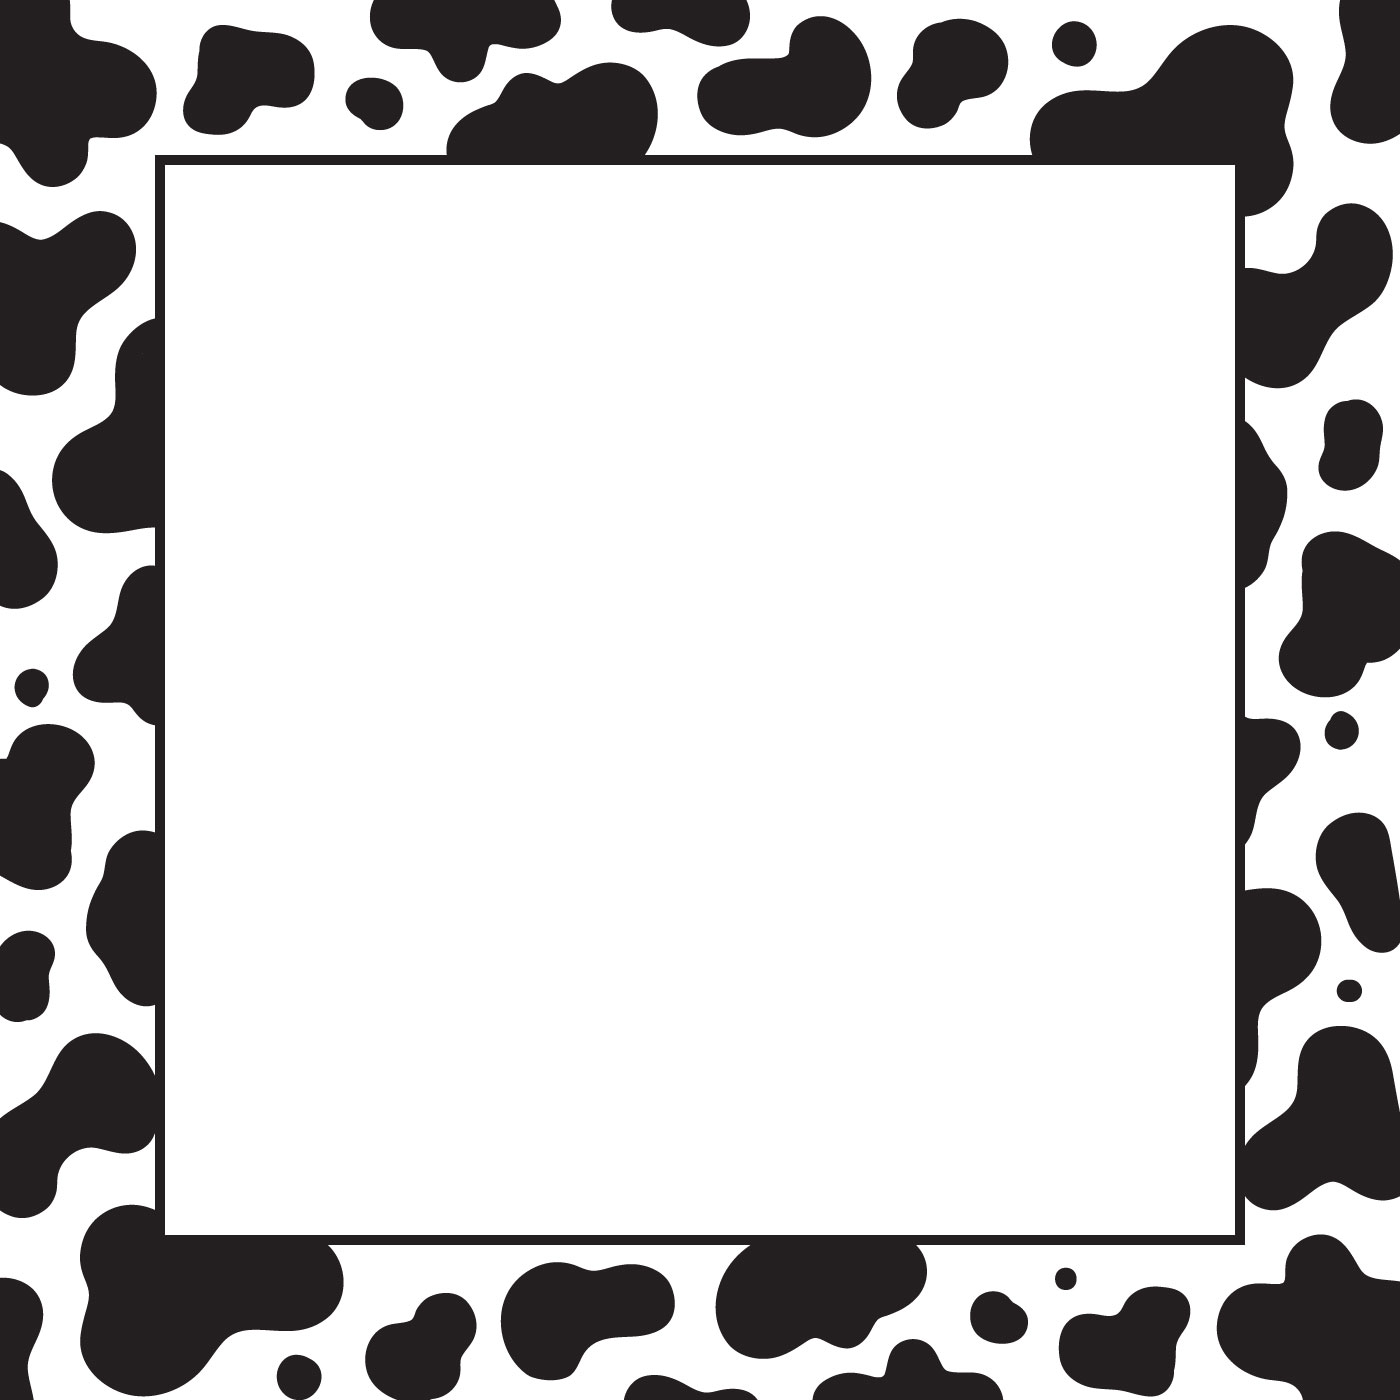 cow-print-background-template-225637-vector-art-at-vecteezy